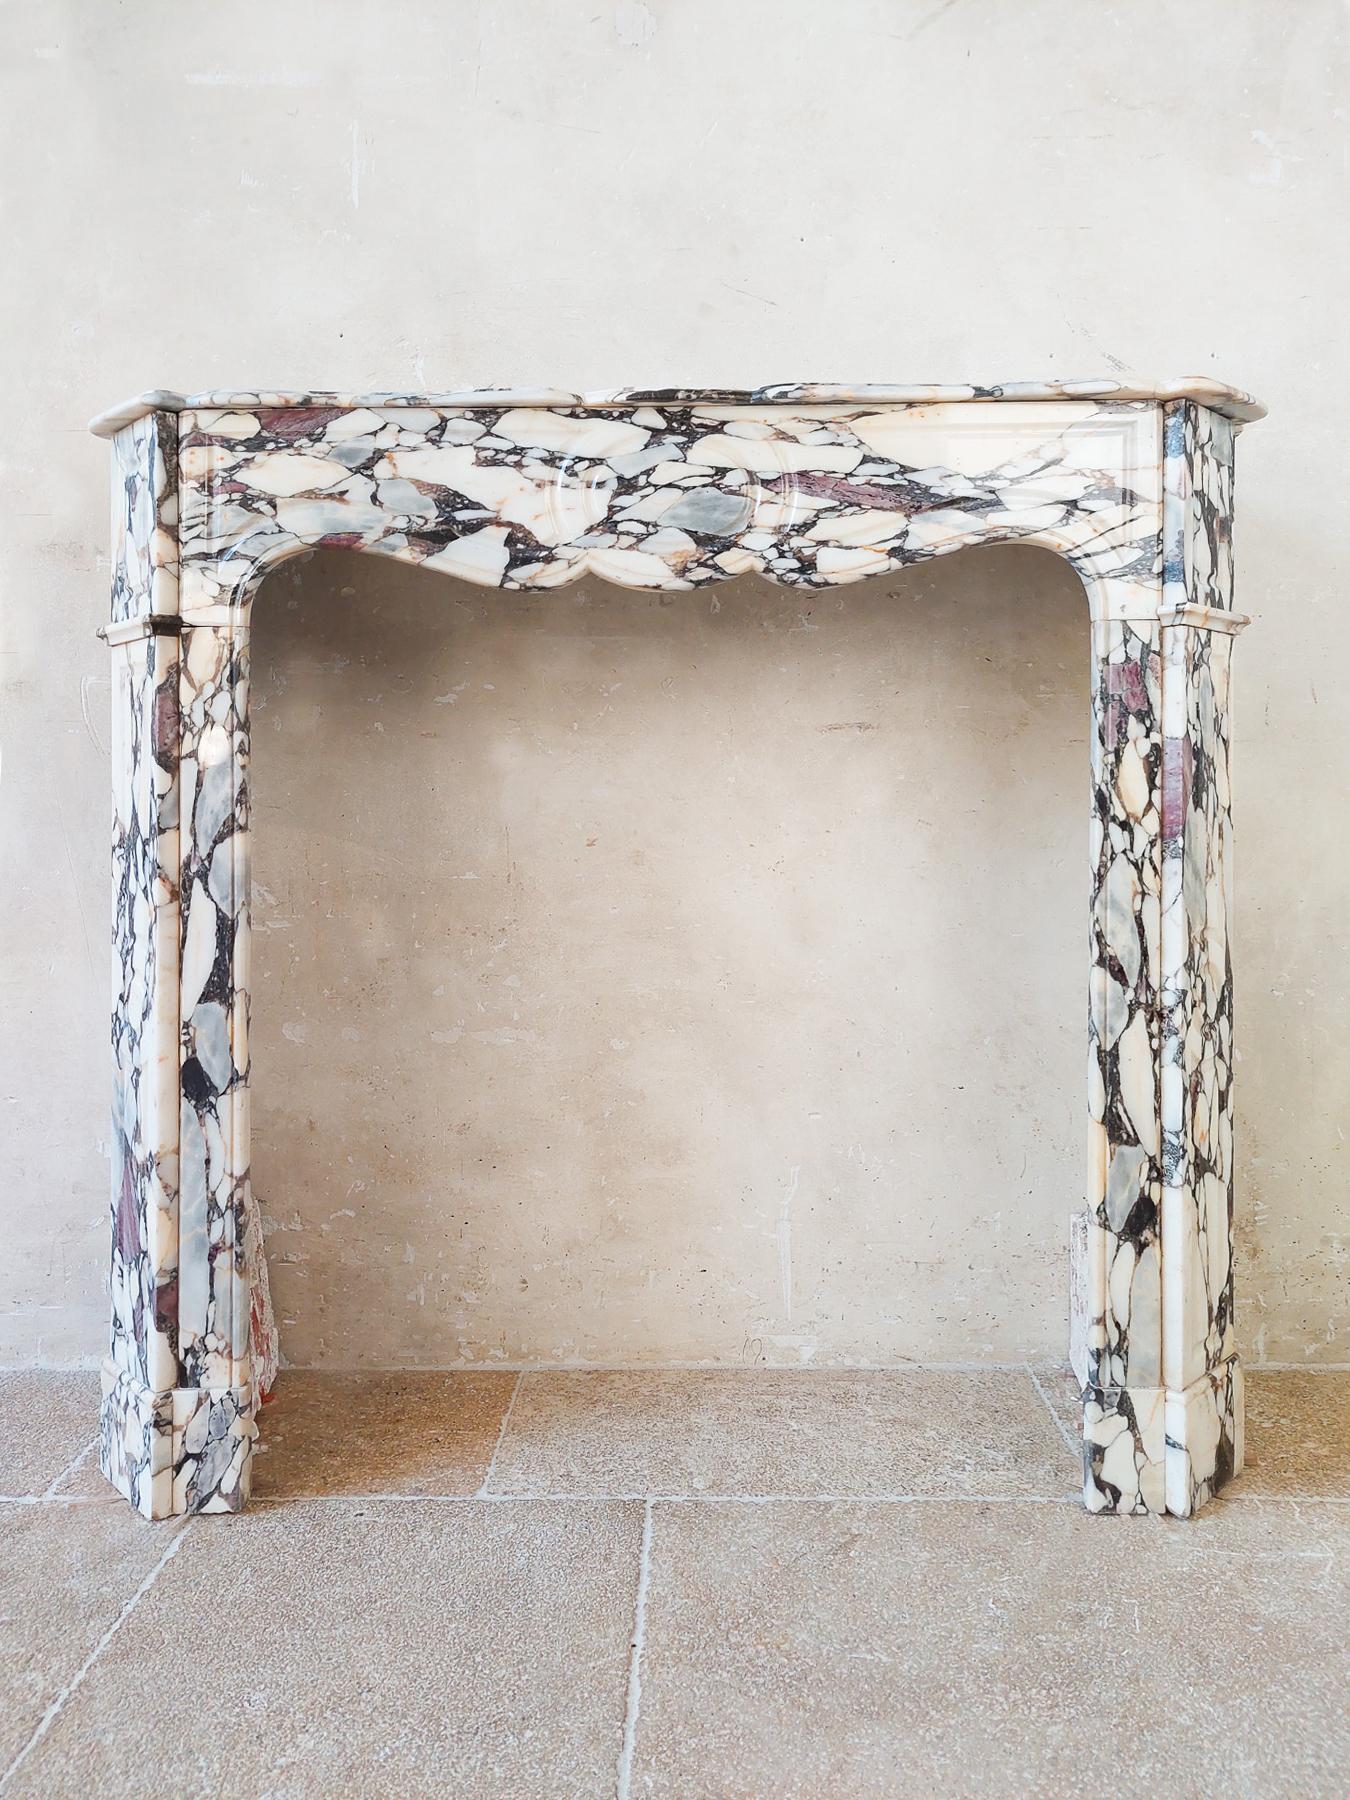 Antique French 19th century pompadour fireplace in Brèche Médicis marble. Charming French marble mantlepiece in off white, with dark veins and creme, grey and violet color tones.

Dimensions: H 103 x 113 x 33 cm
opening: 85 x 77.5 cm